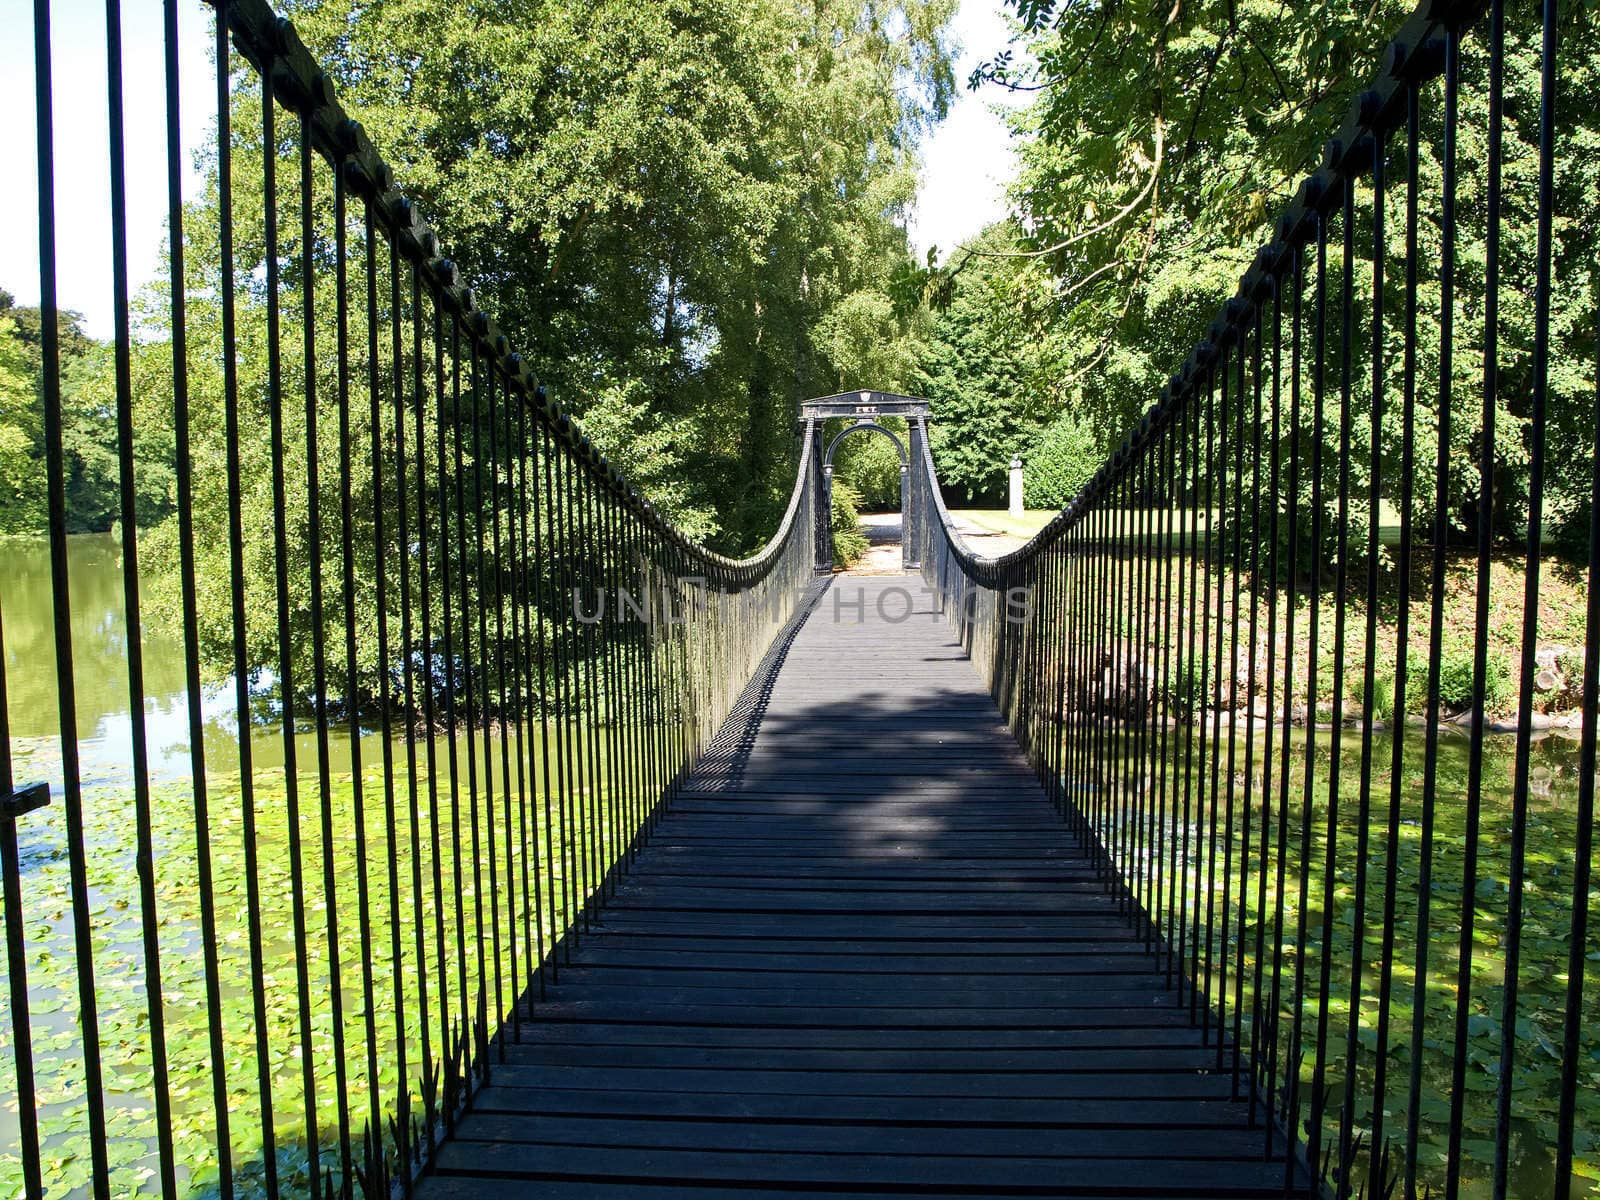 Old Steel footbridge in a country estate Denmark perspective vanishing point view